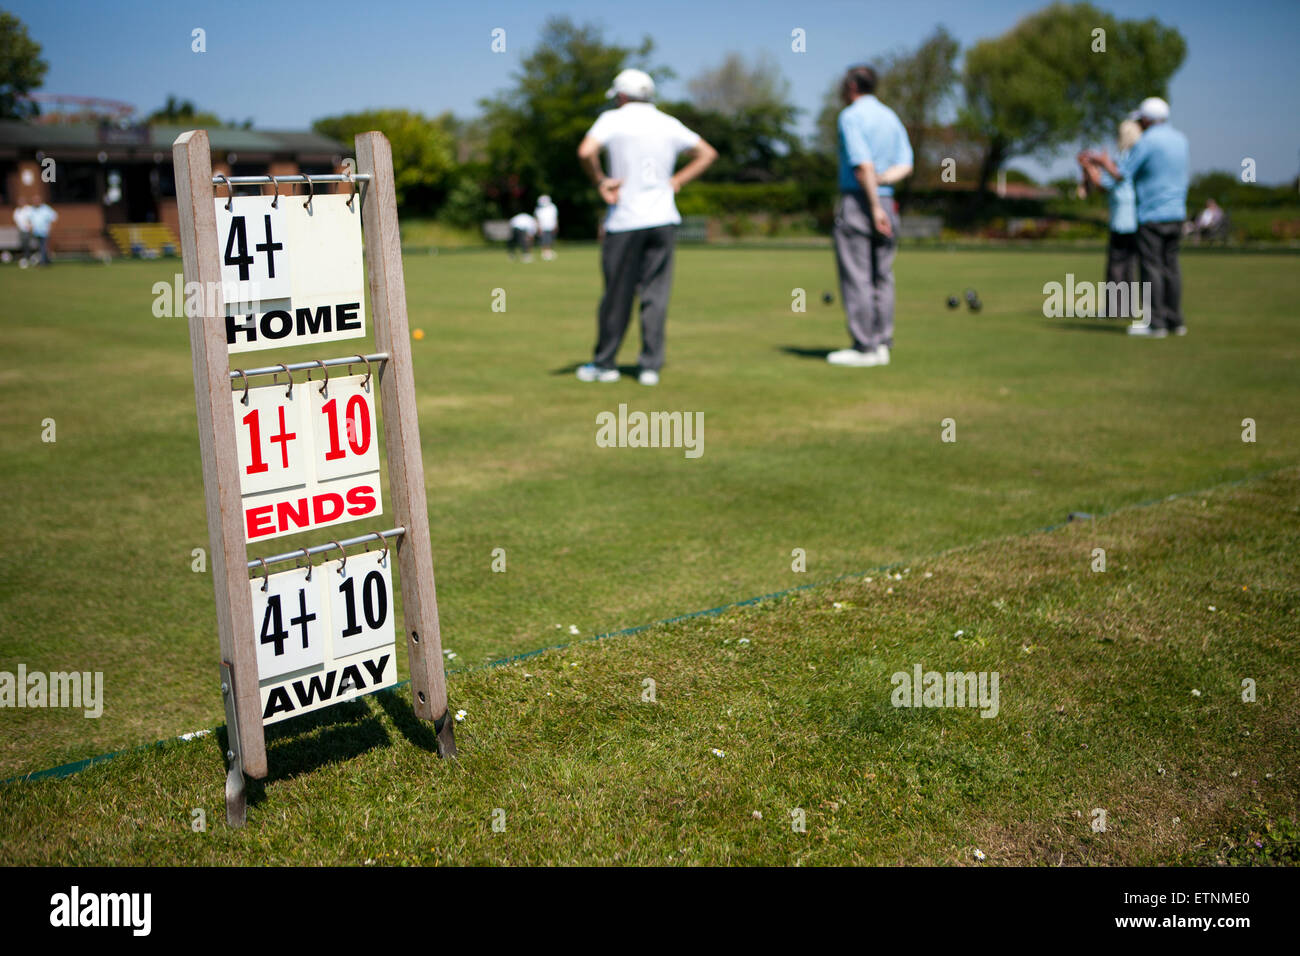 Members of Southport bowling club playing a competitive match, Merseyside, UK Stock Photo